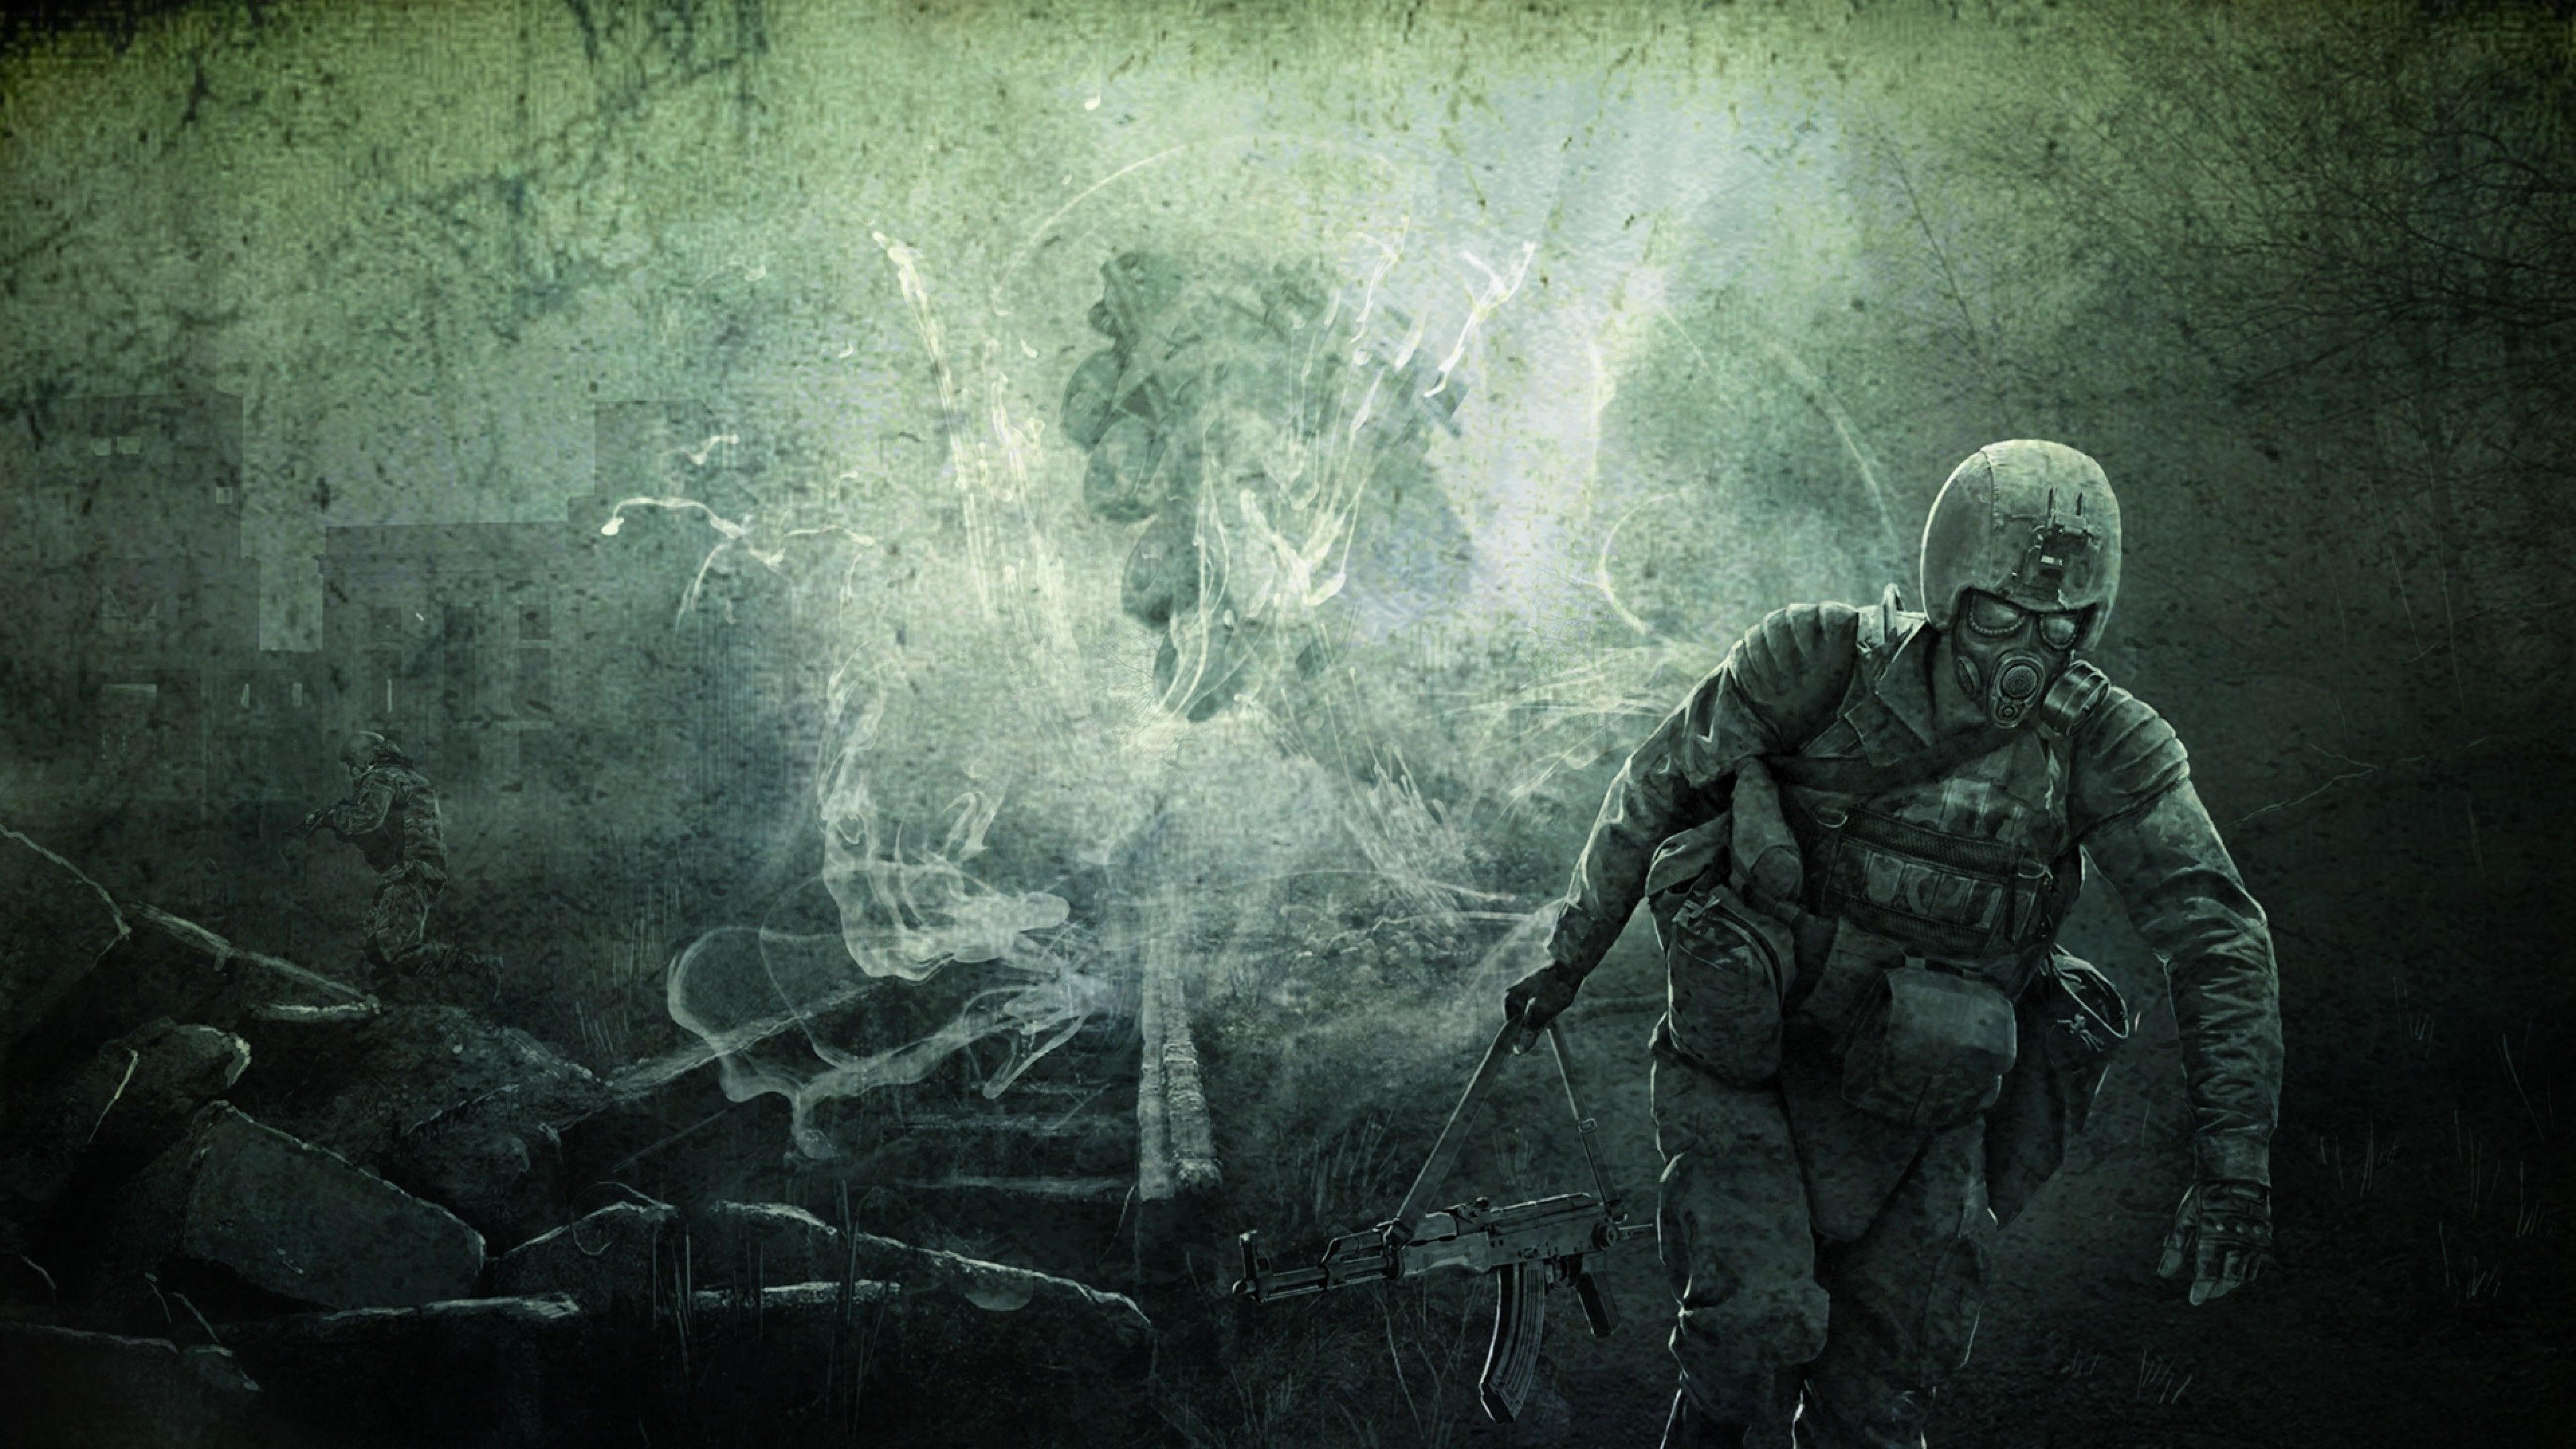 S.T.A.L.K.E.R.: Shadow of Chernobyl Wallpapers